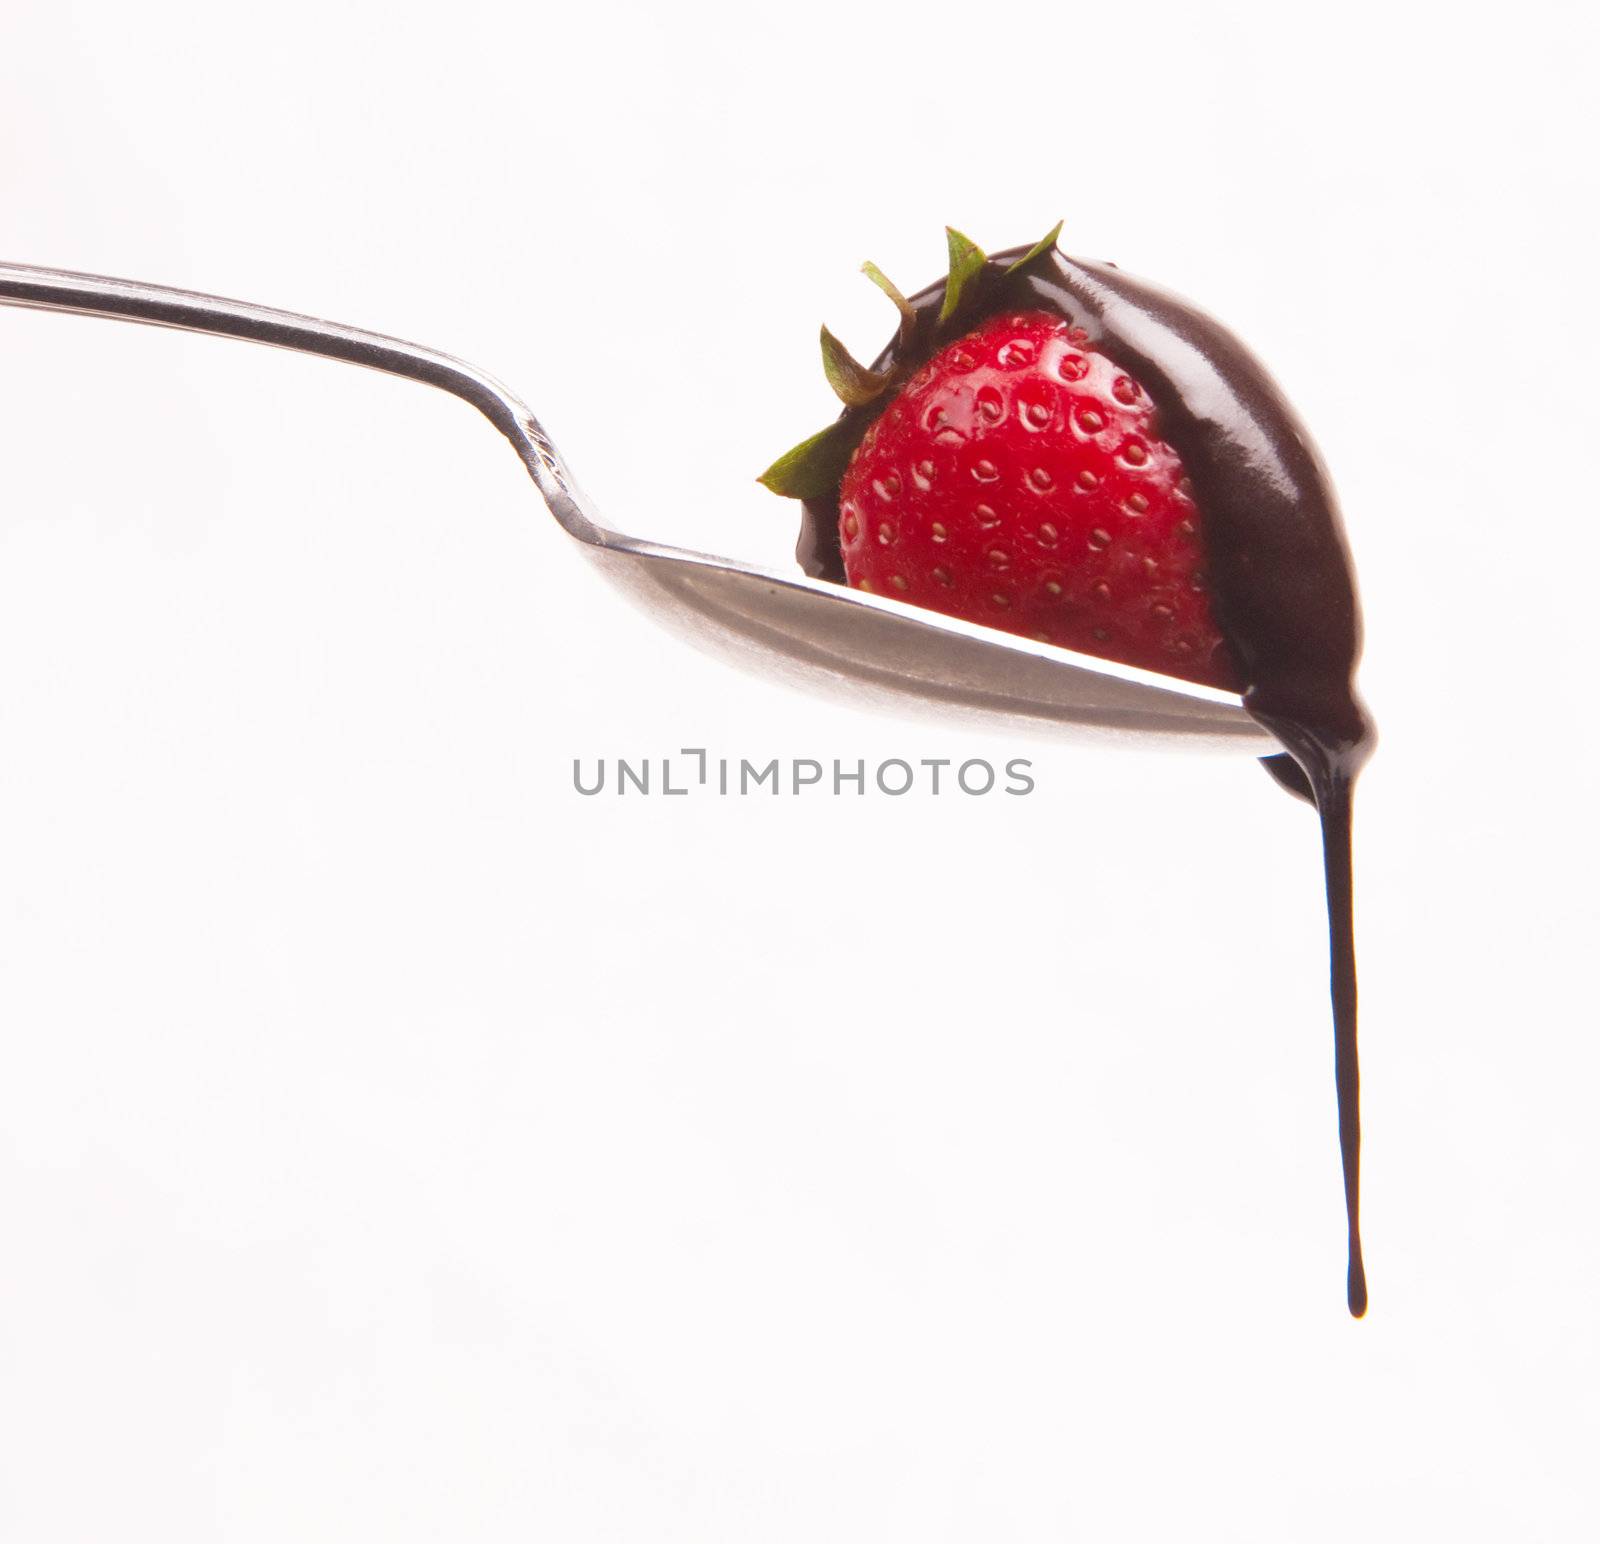 Chocolate hits the Berry by ChrisBoswell